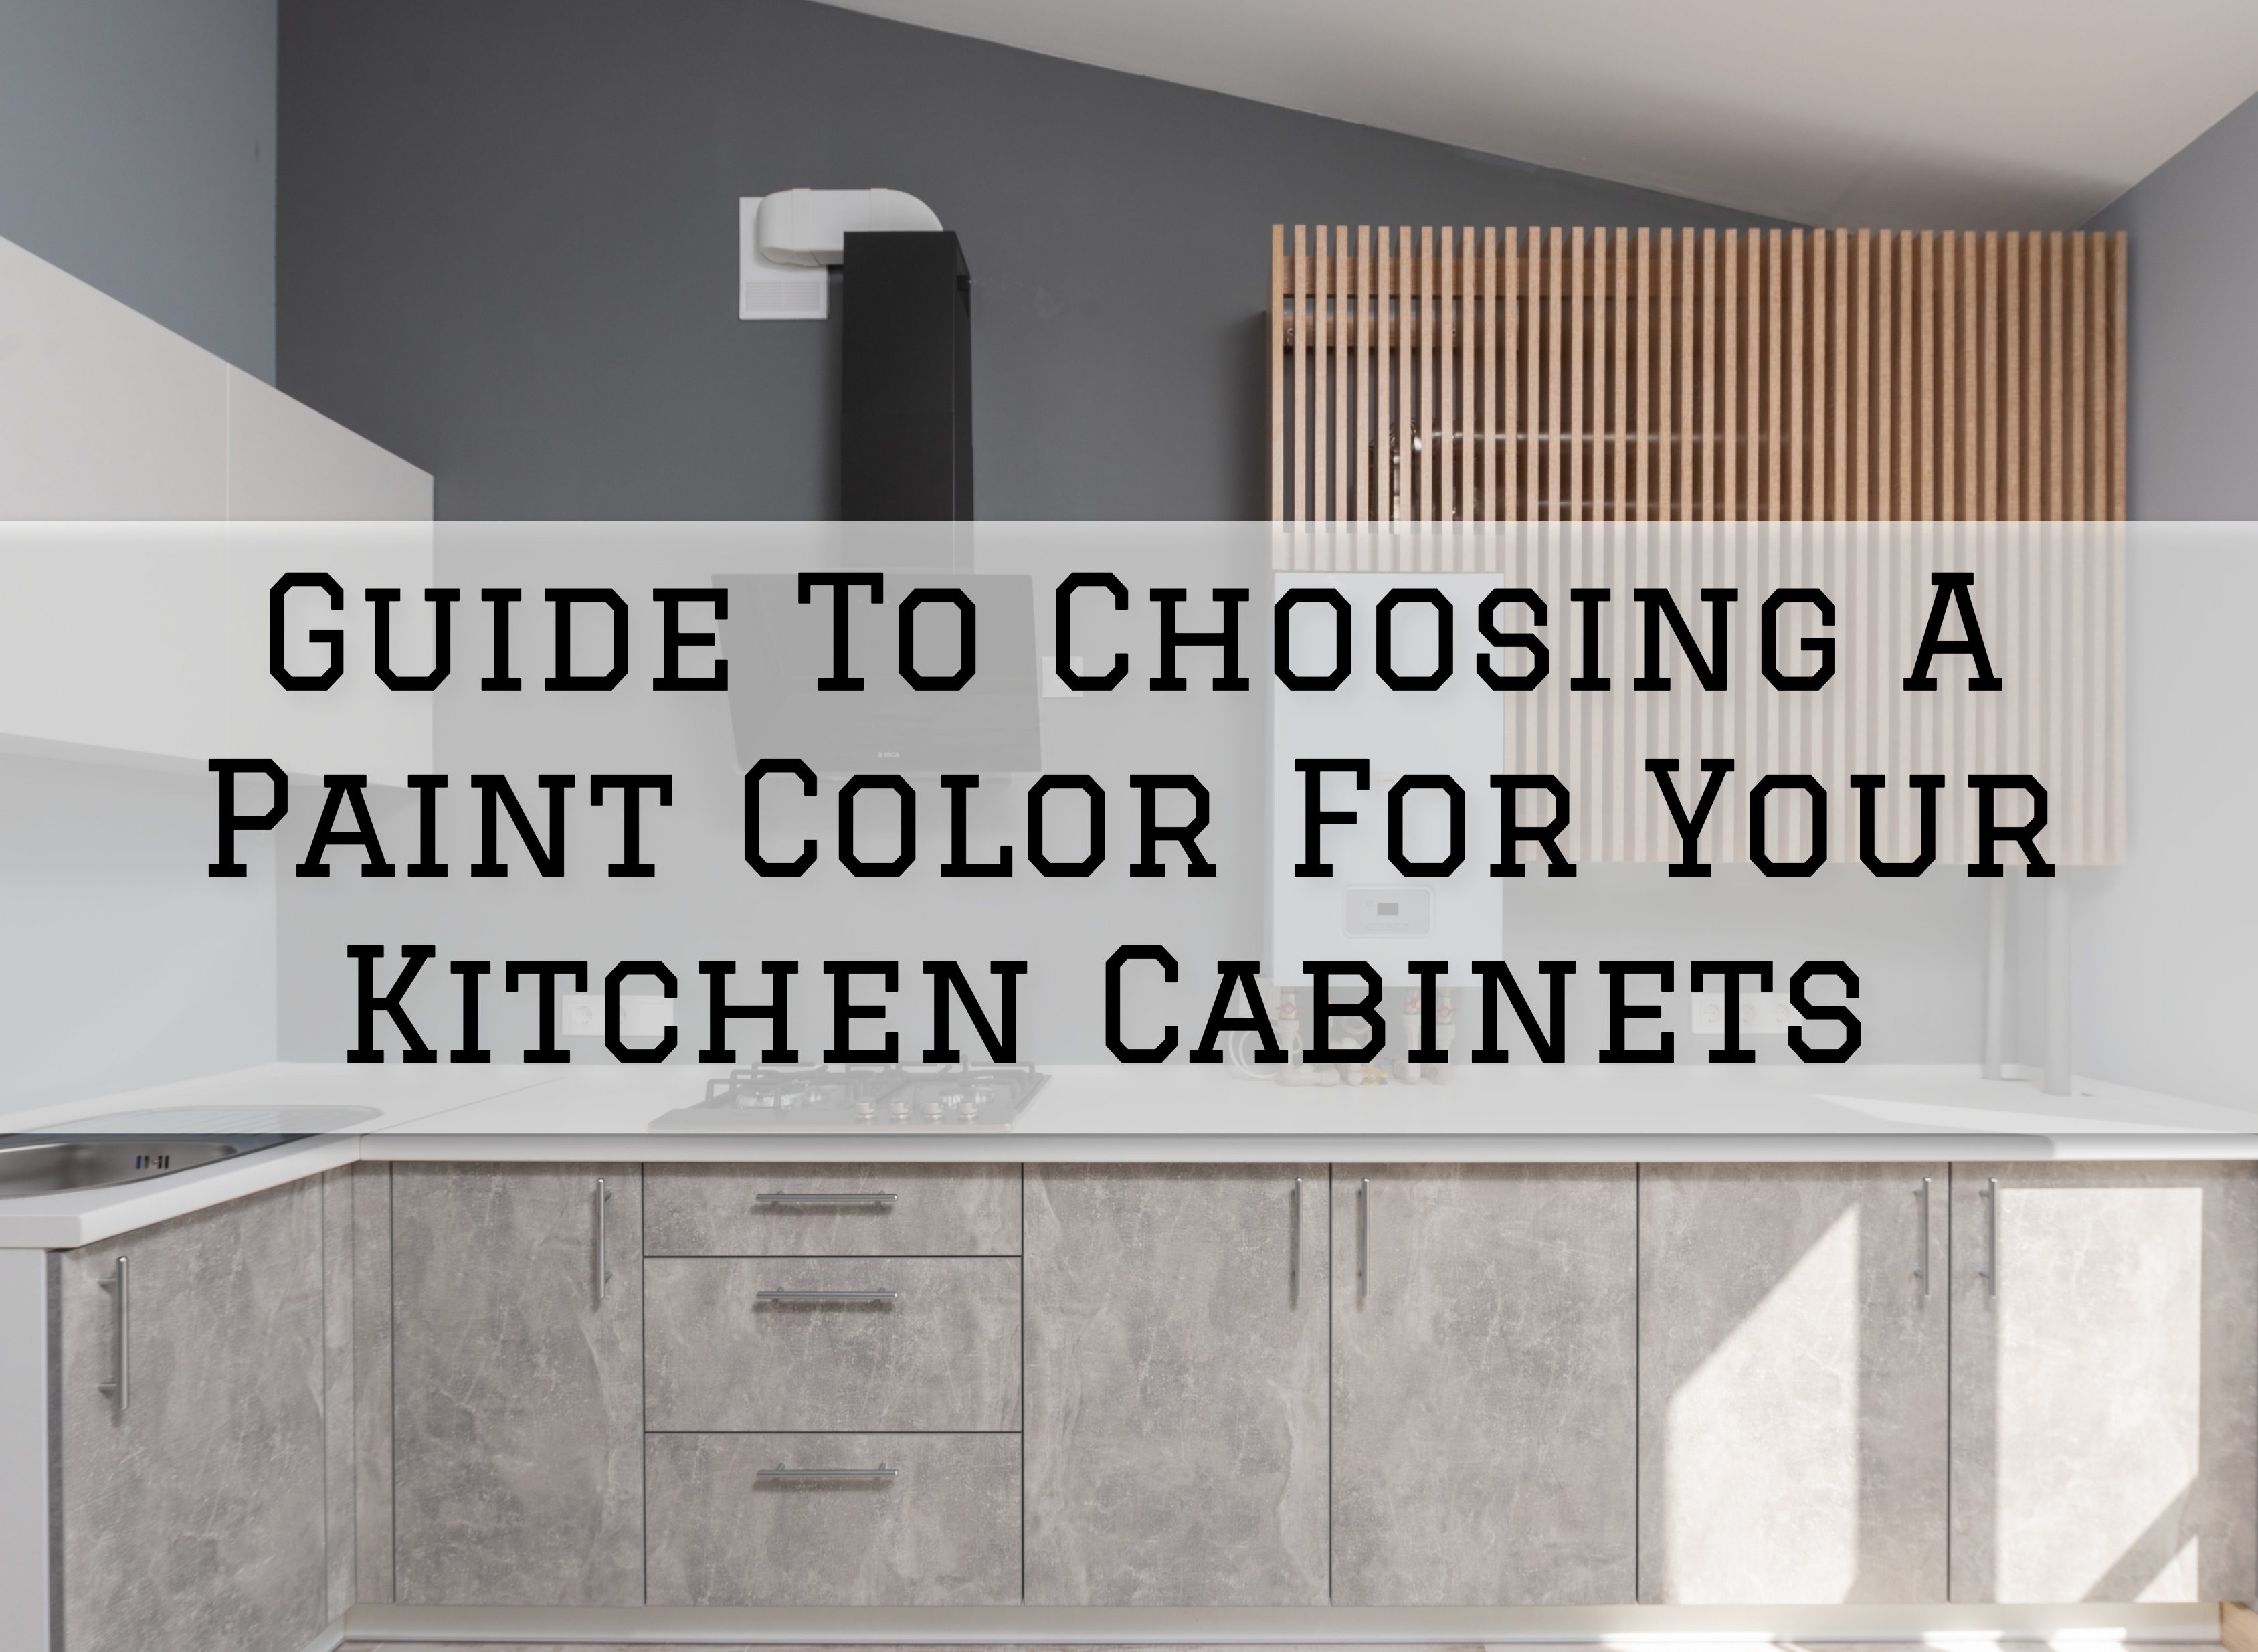 http://easonpainting.com/wp-content/uploads/2023-04-04-Eason-Painting-Richmond-MI-Guide-To-Choosing-A-Paint-Color-For-Your-Kitchen-Cabinets.jpg